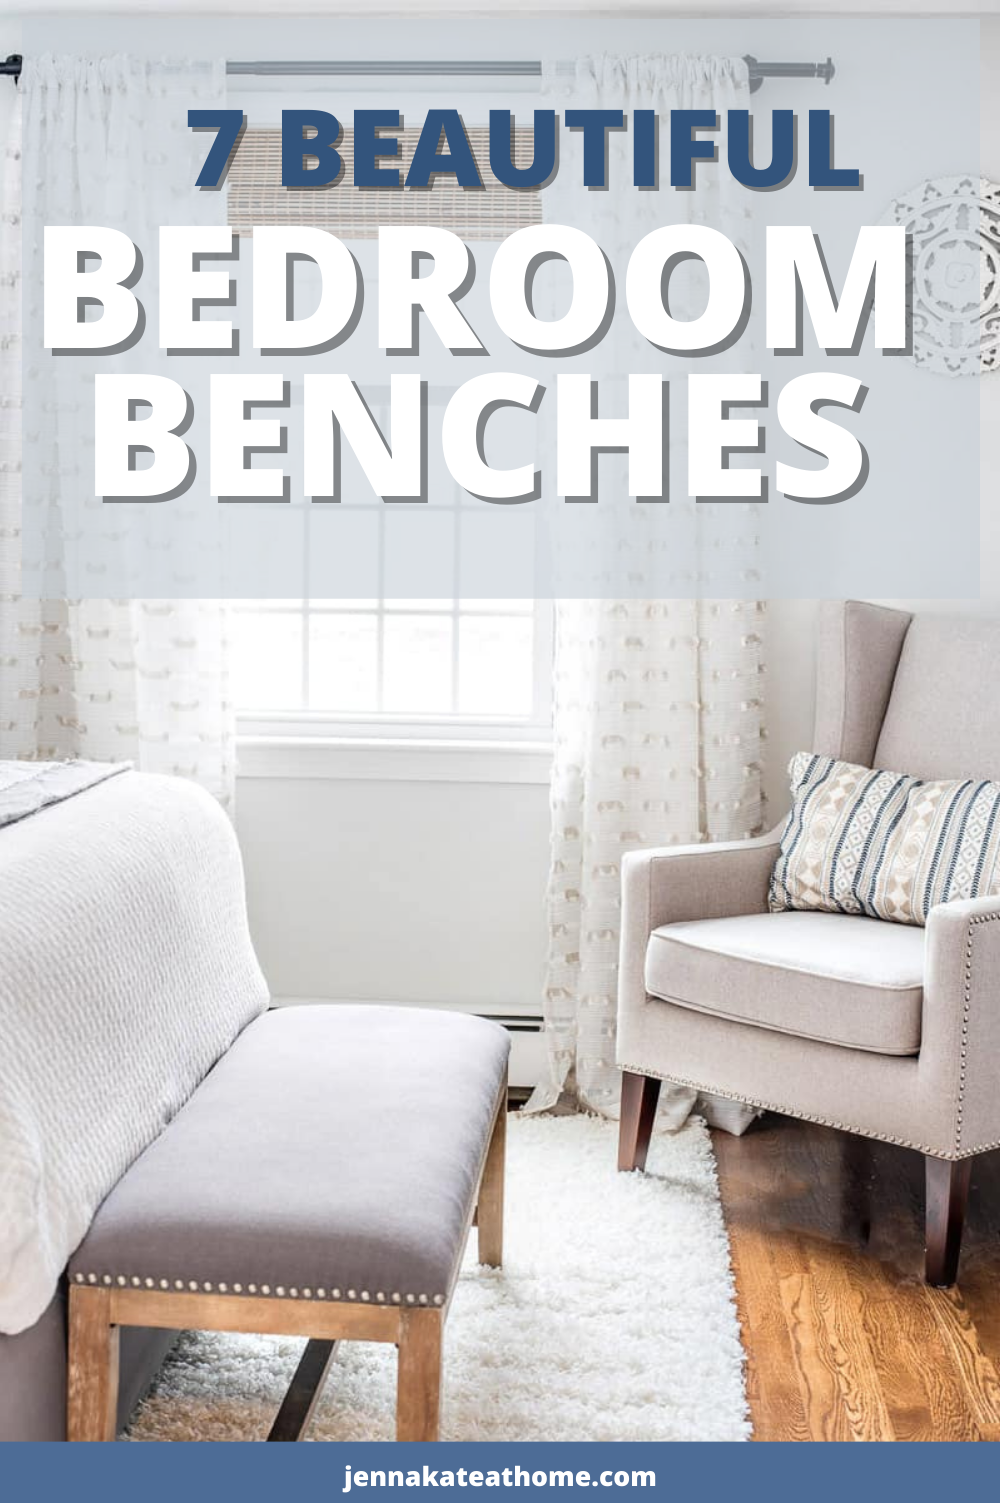 7 Beautiful bedroom benches